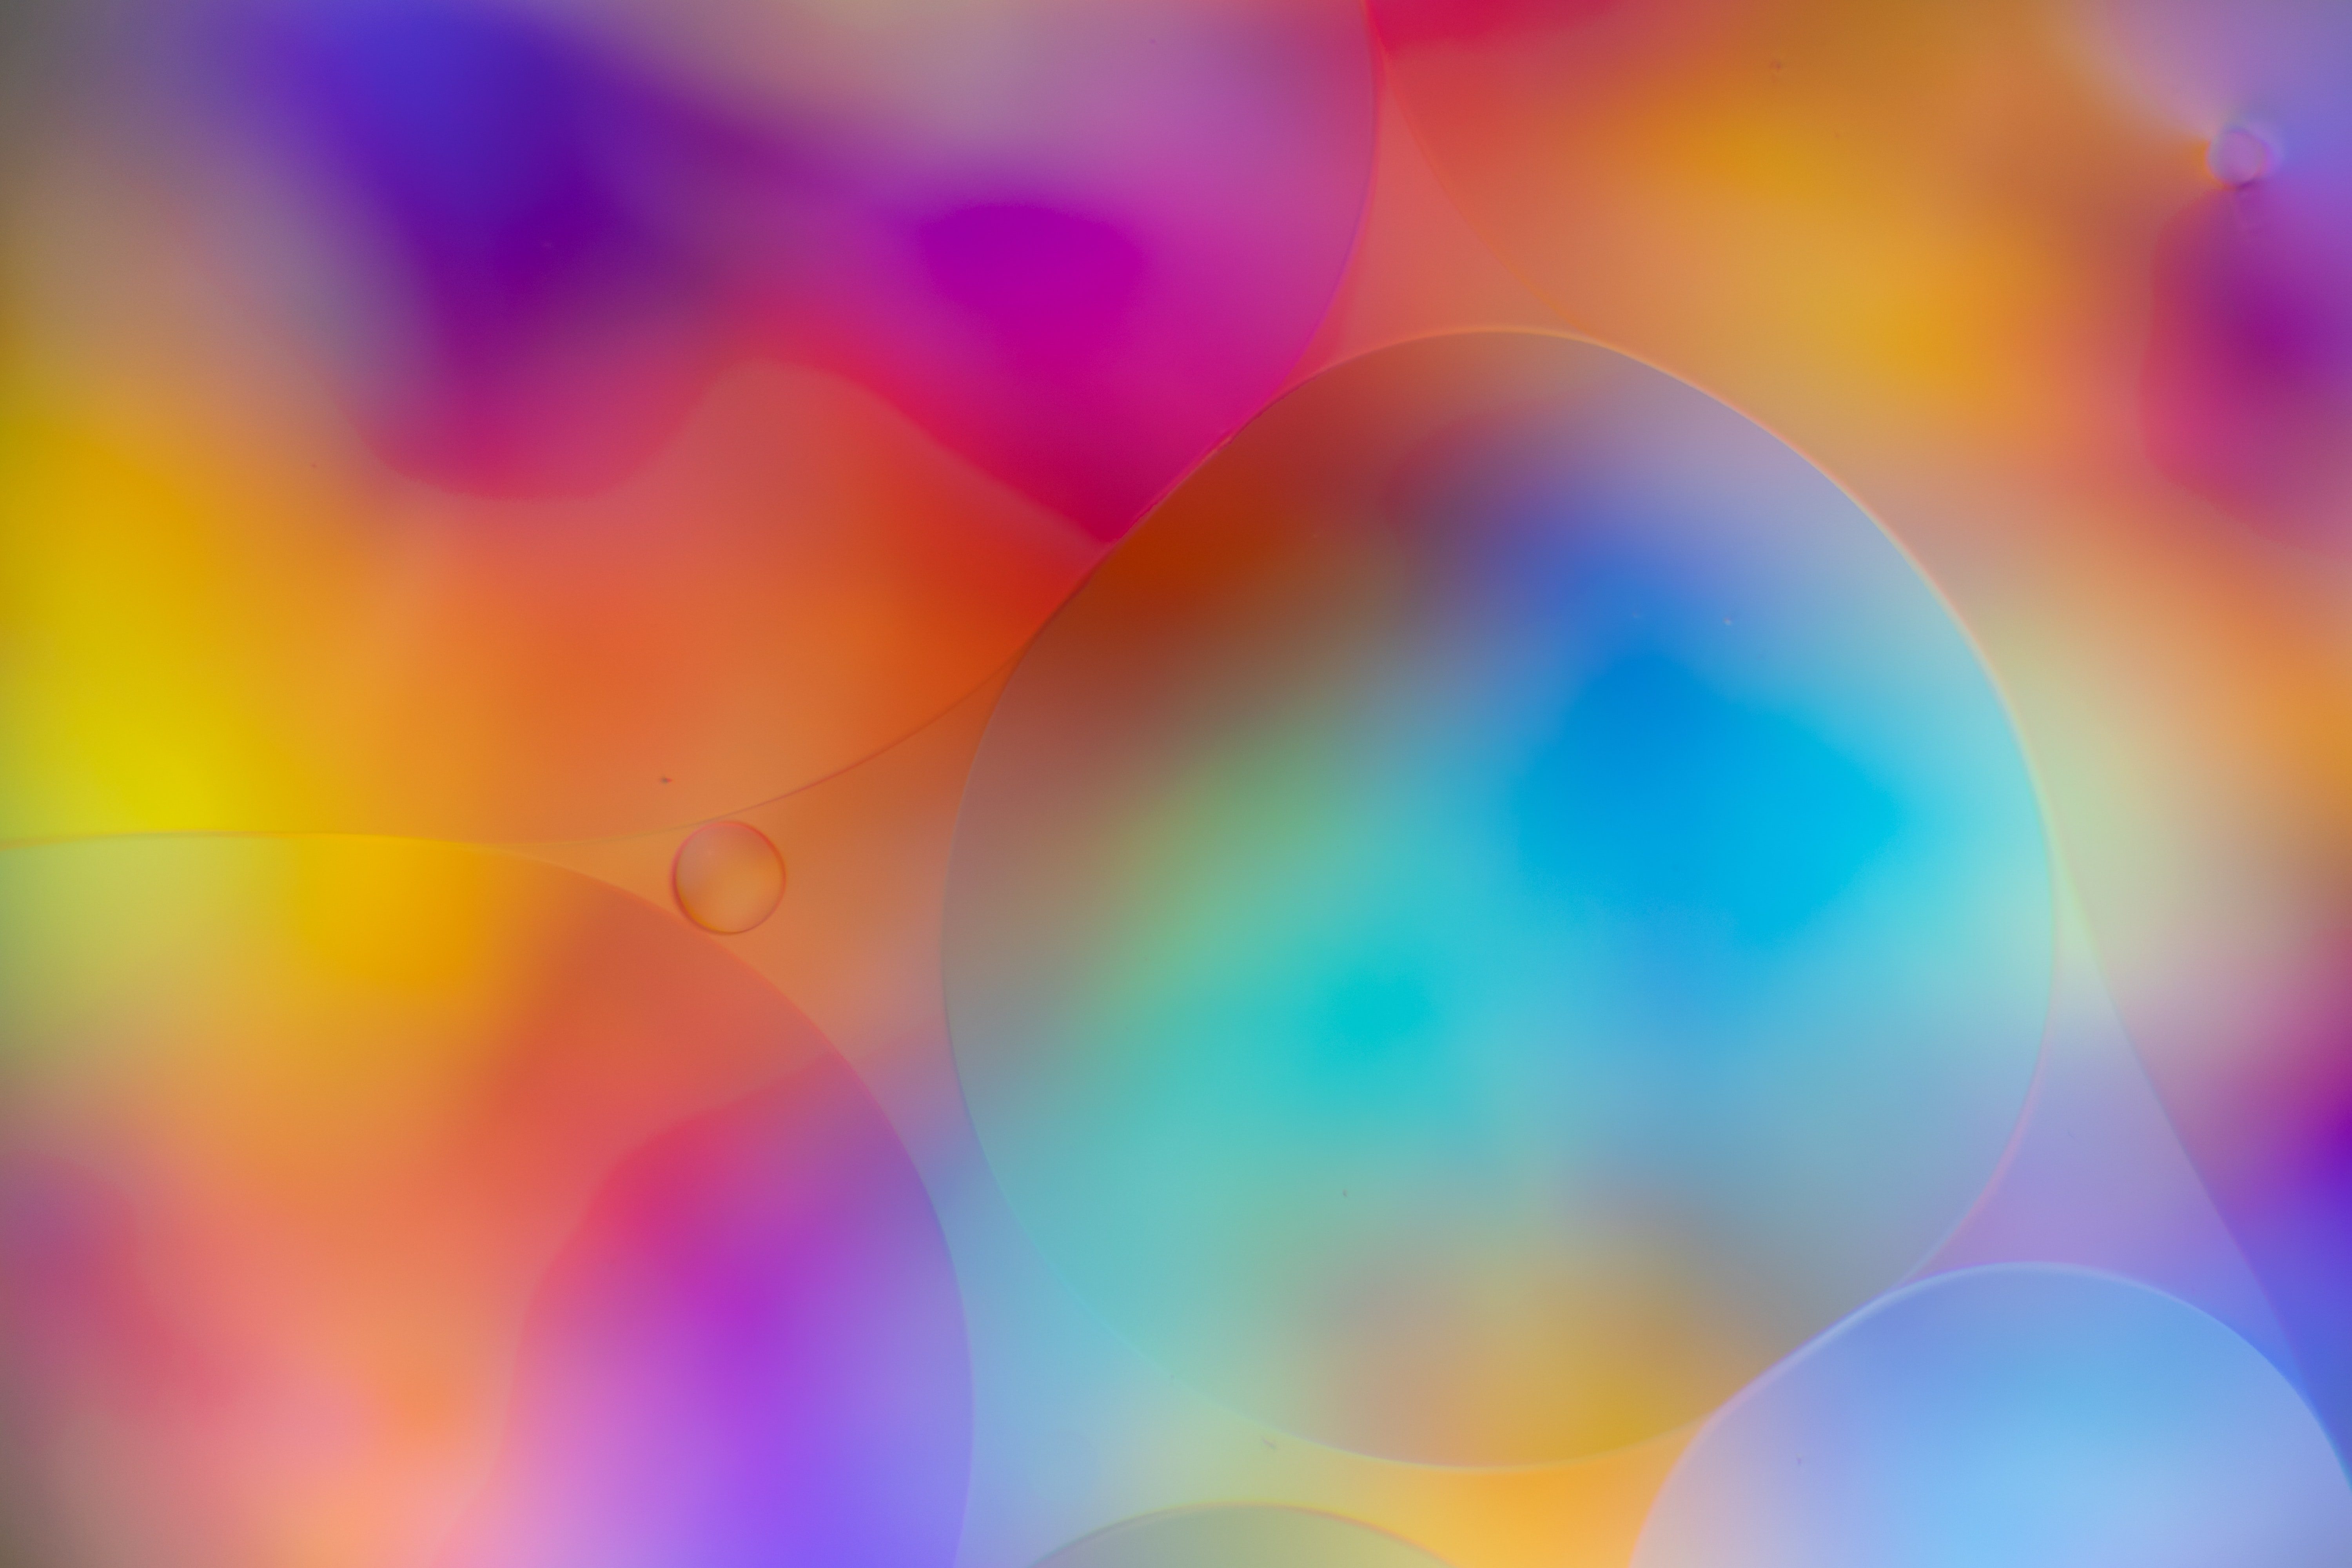 wallpapers motley, gradient, abstract, water, bubbles, multicolored